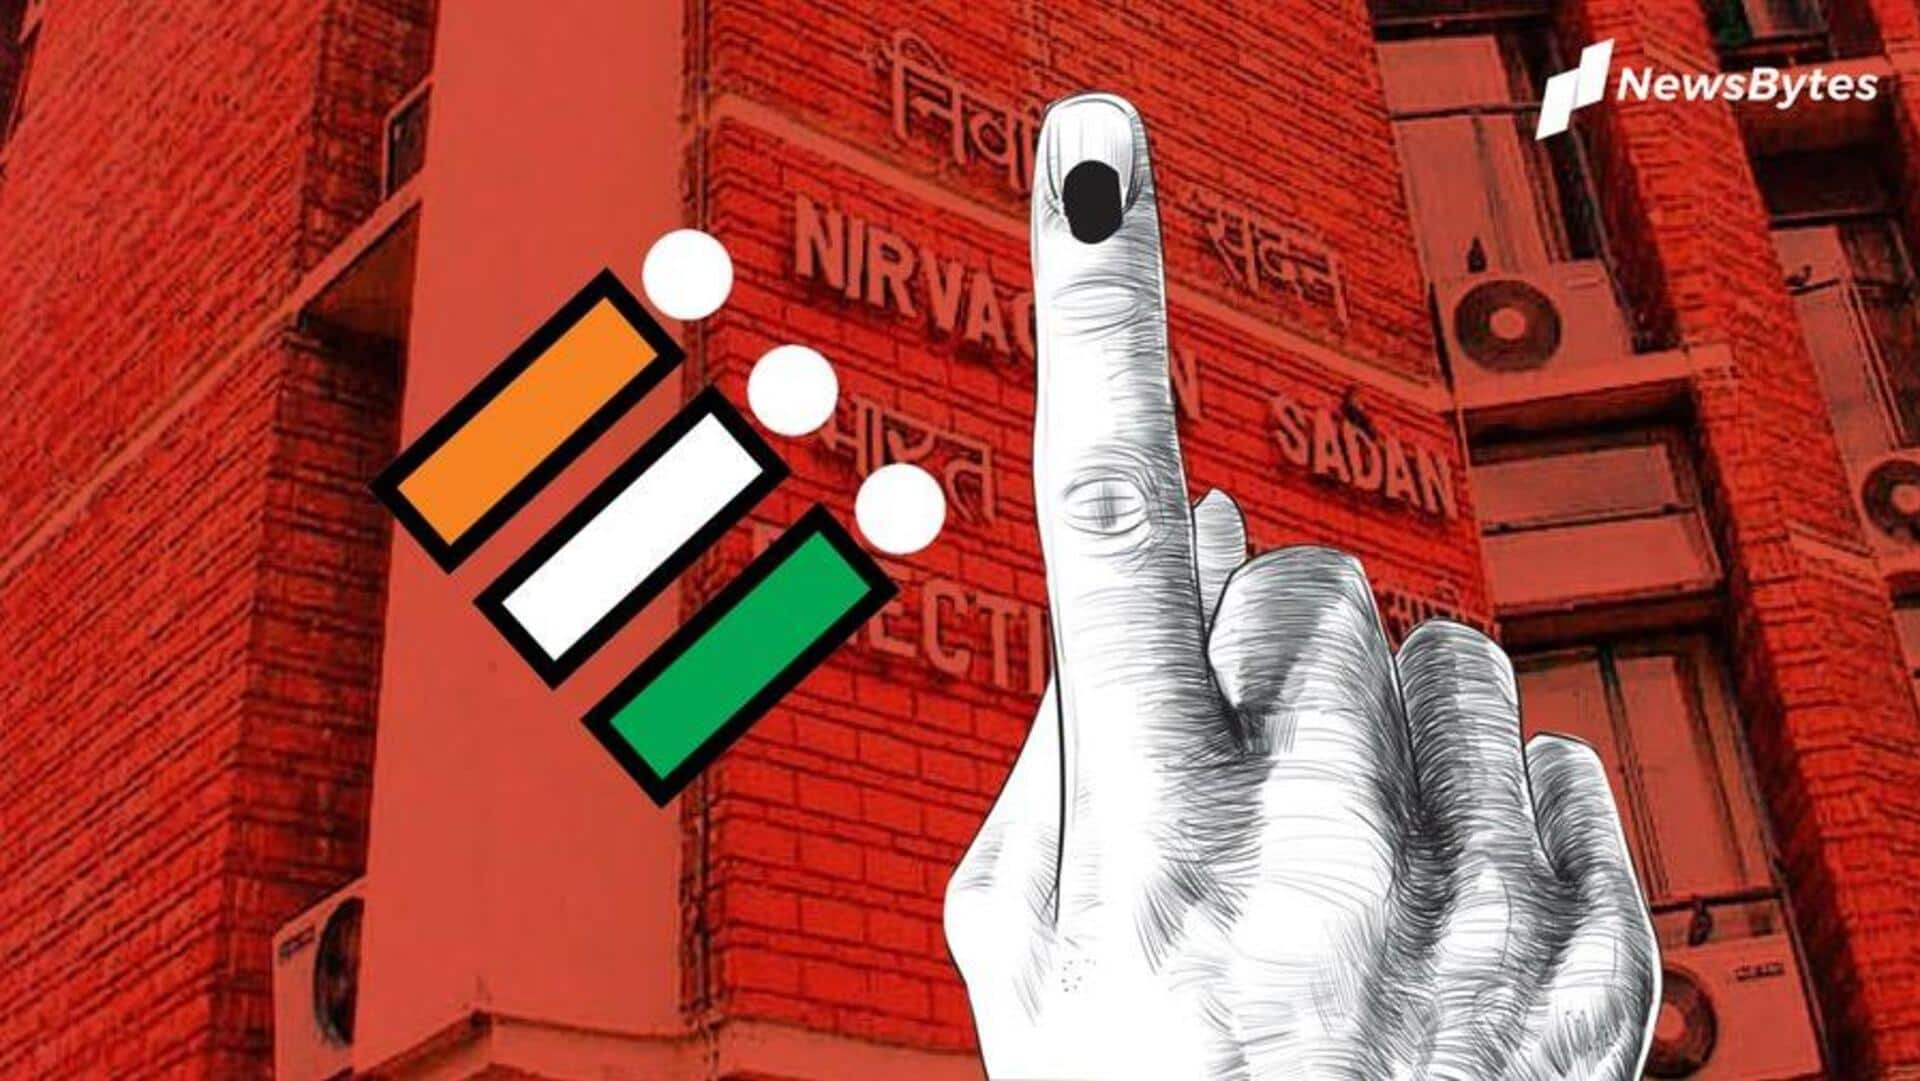 Election commission briefs over 2,100 observers for Lok Sabha elections